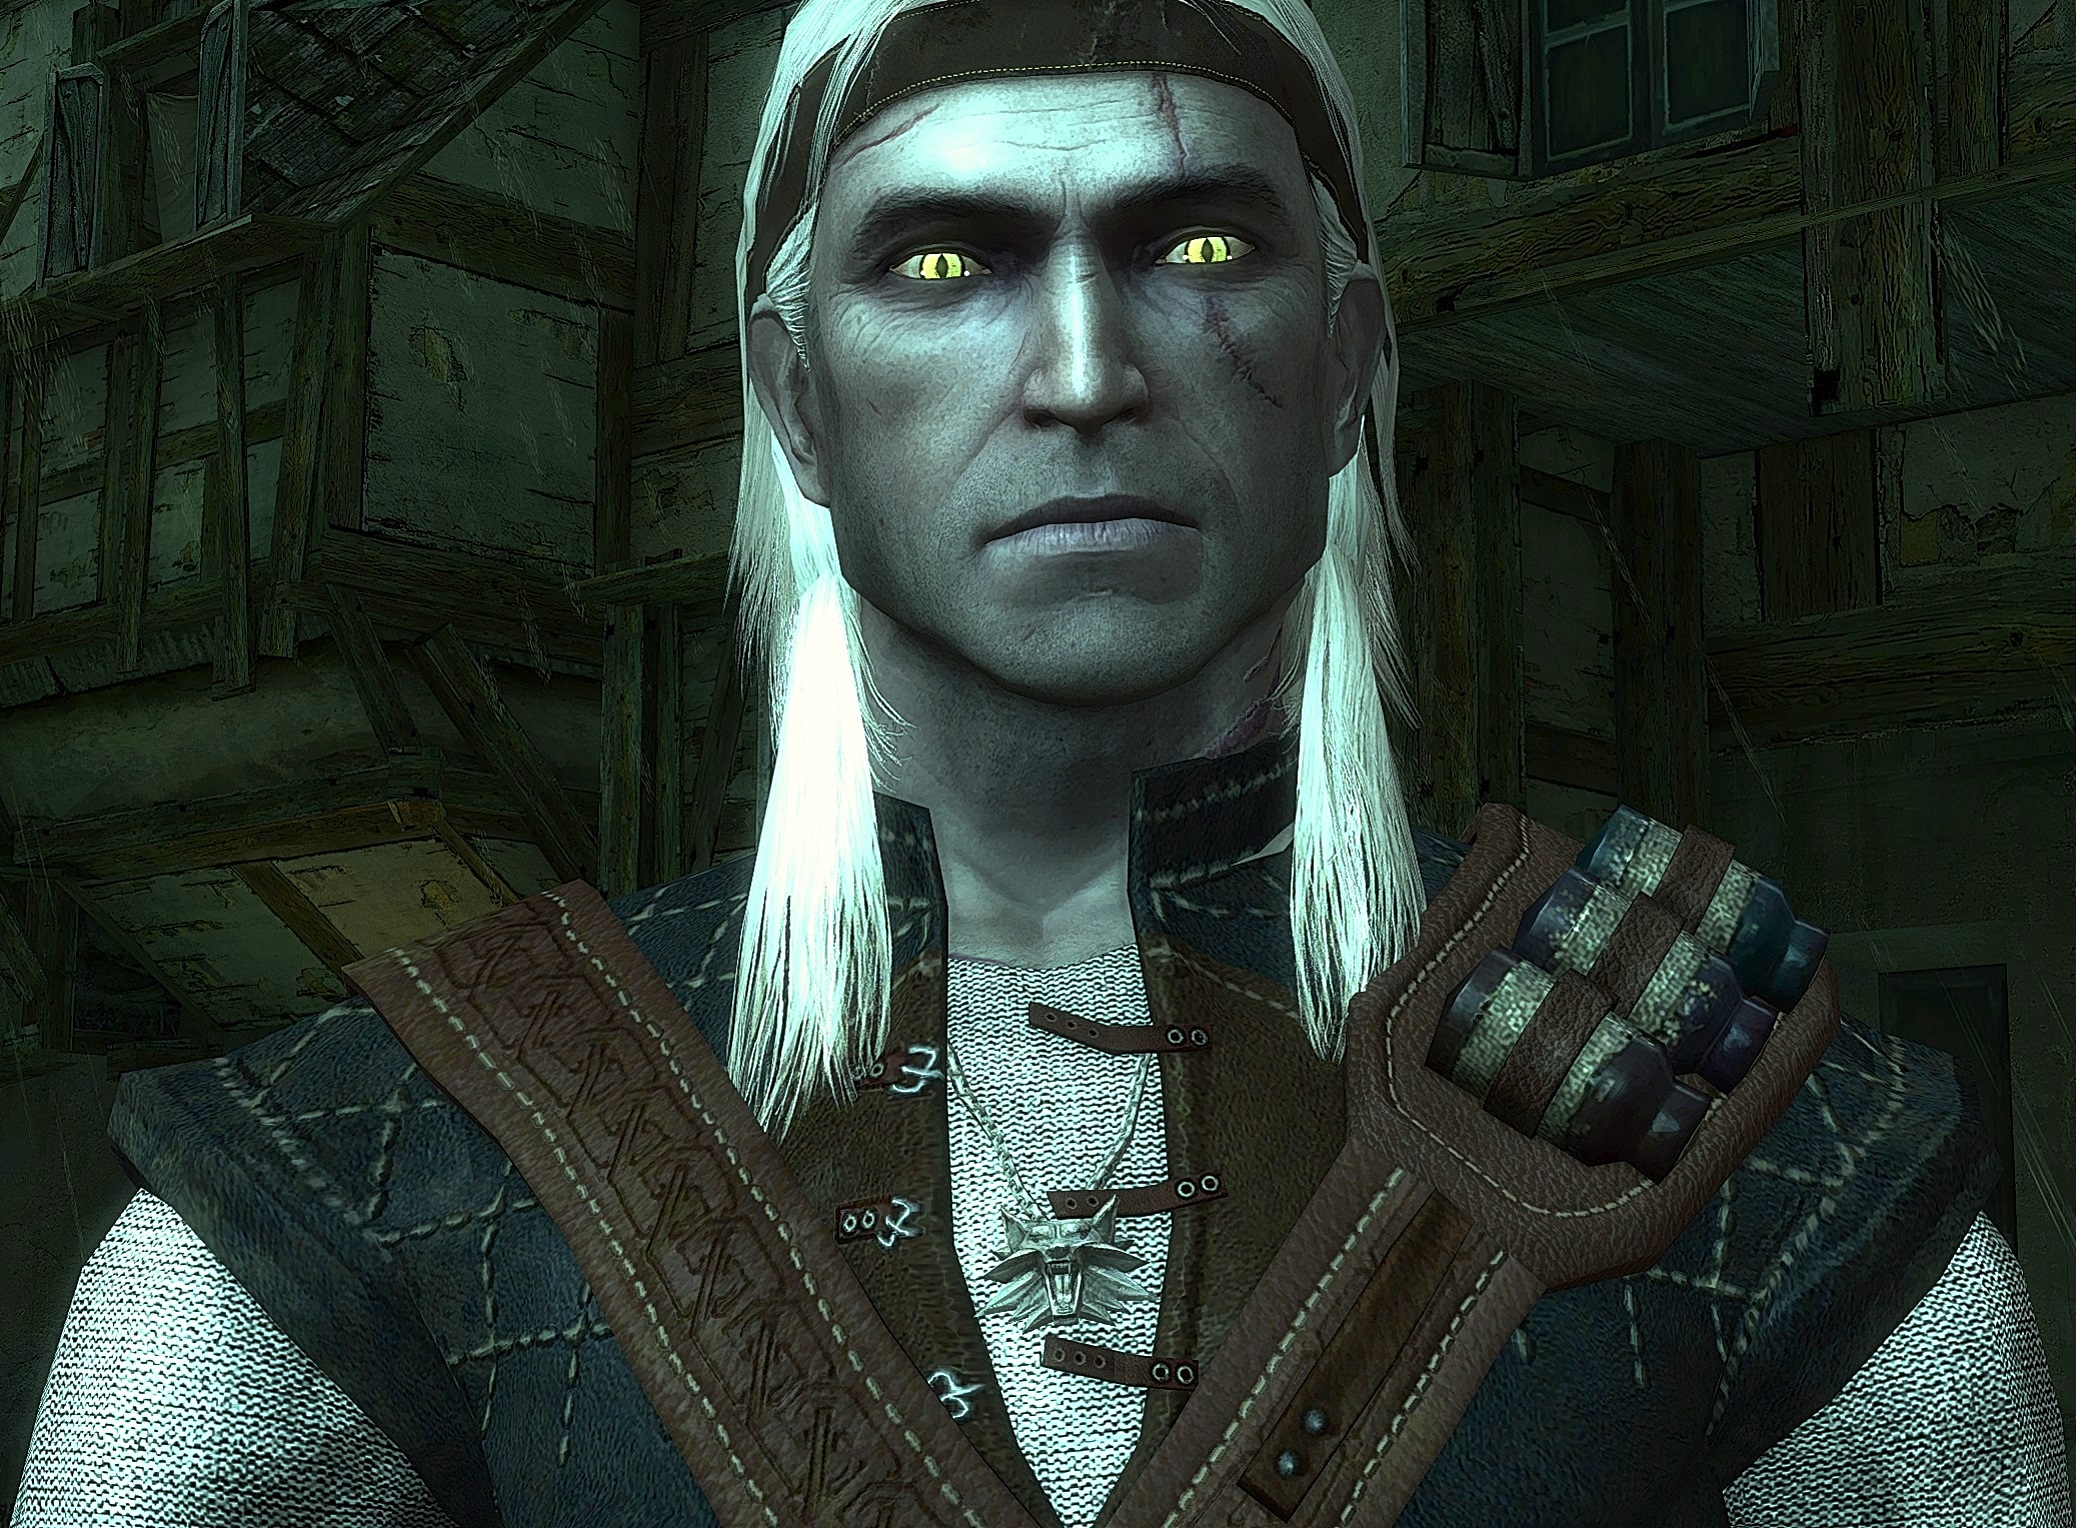 Download Witcher 1 Geralt face for witcher 2 for The Witcher 2